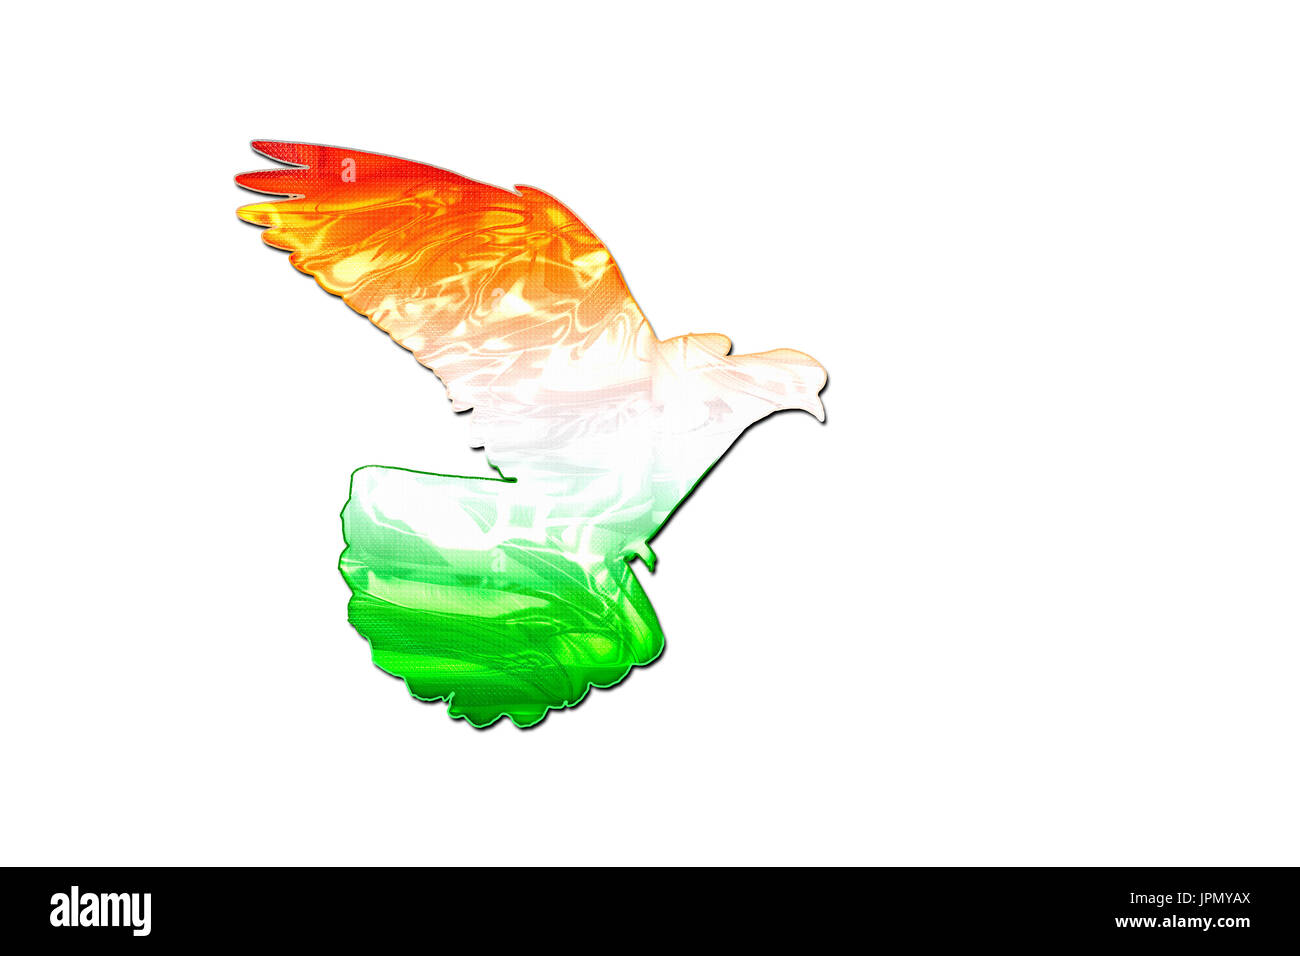 Indian flag colors on silhouette of a dove Stock Photo